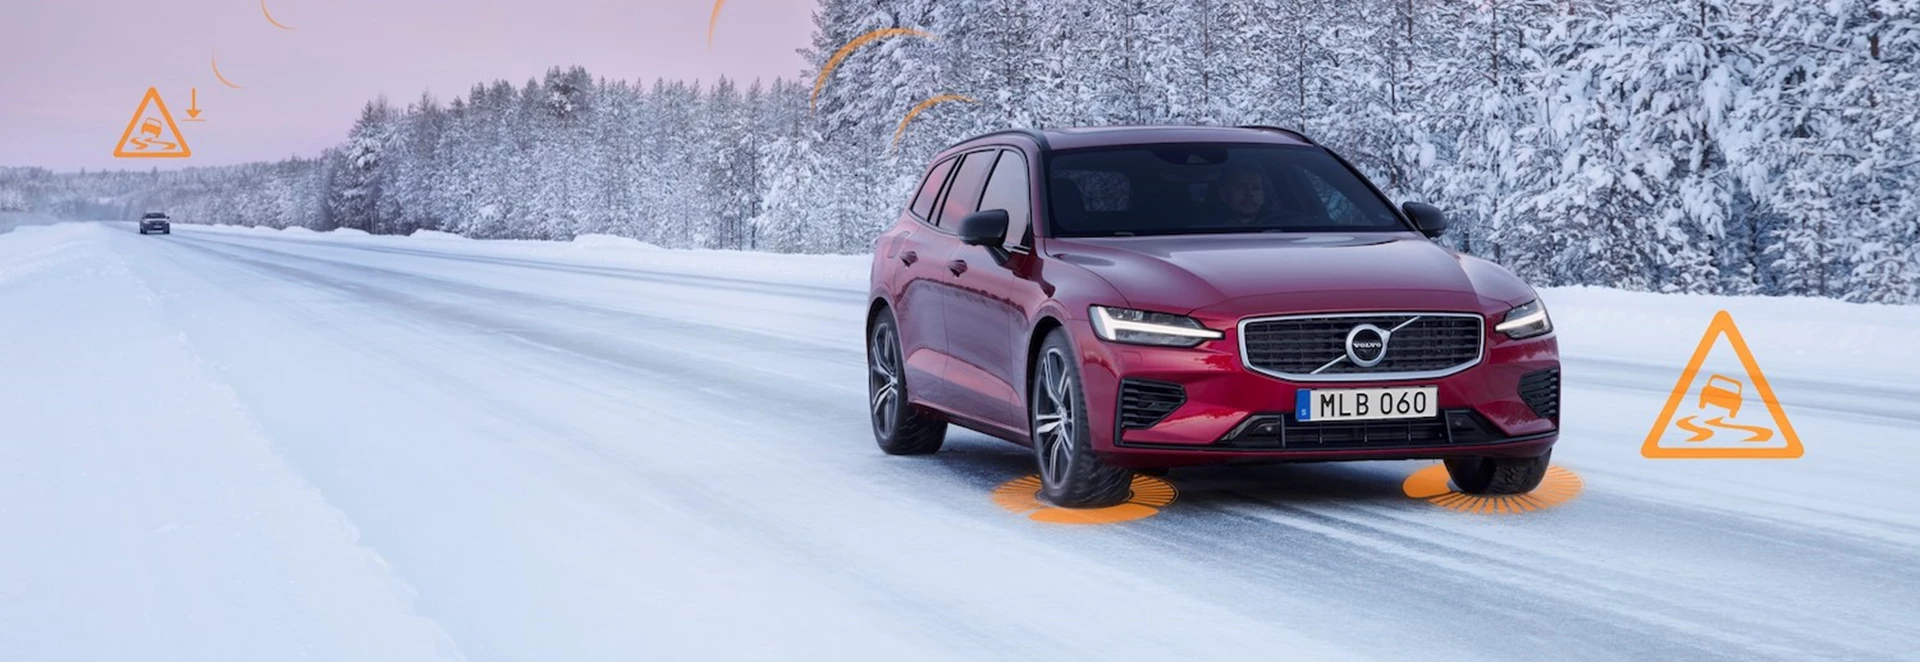 Volvos to warn other vehicles of hazards ahead 